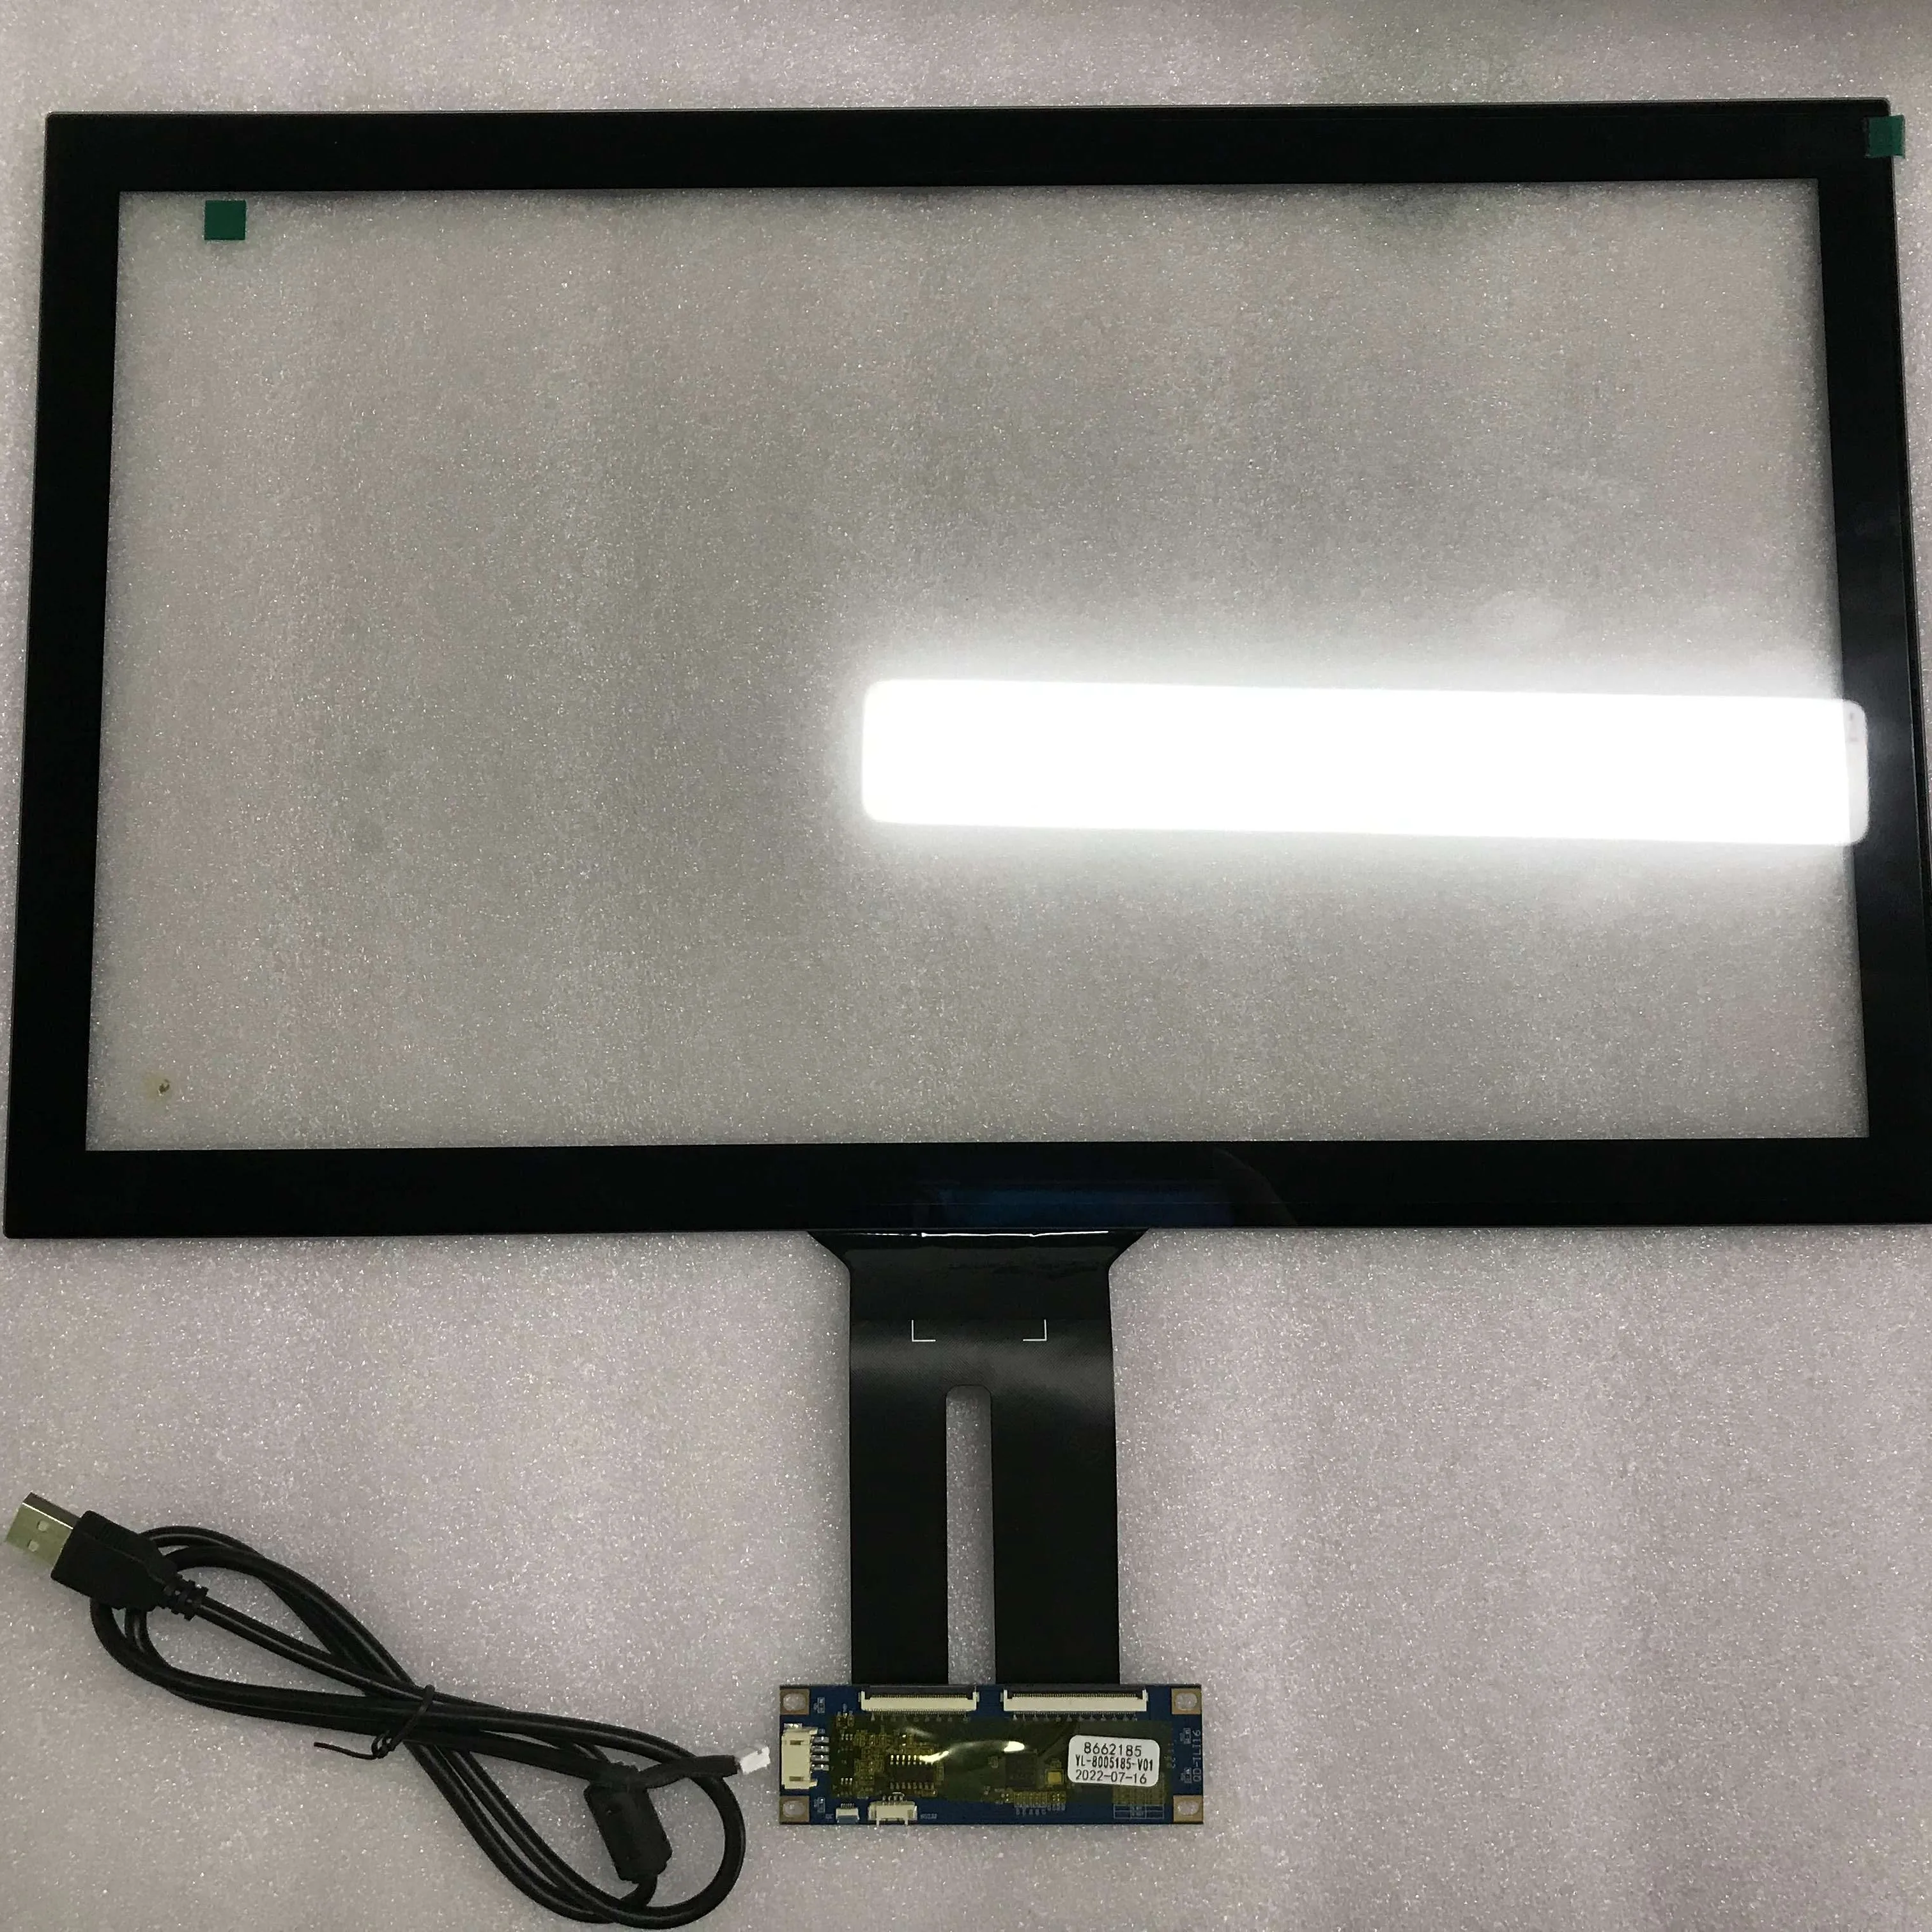 multi touch AG AR AF custom sensor glass EETI ILITEK touch controller pcap 18.5 inch capacitive touch screen panel kit